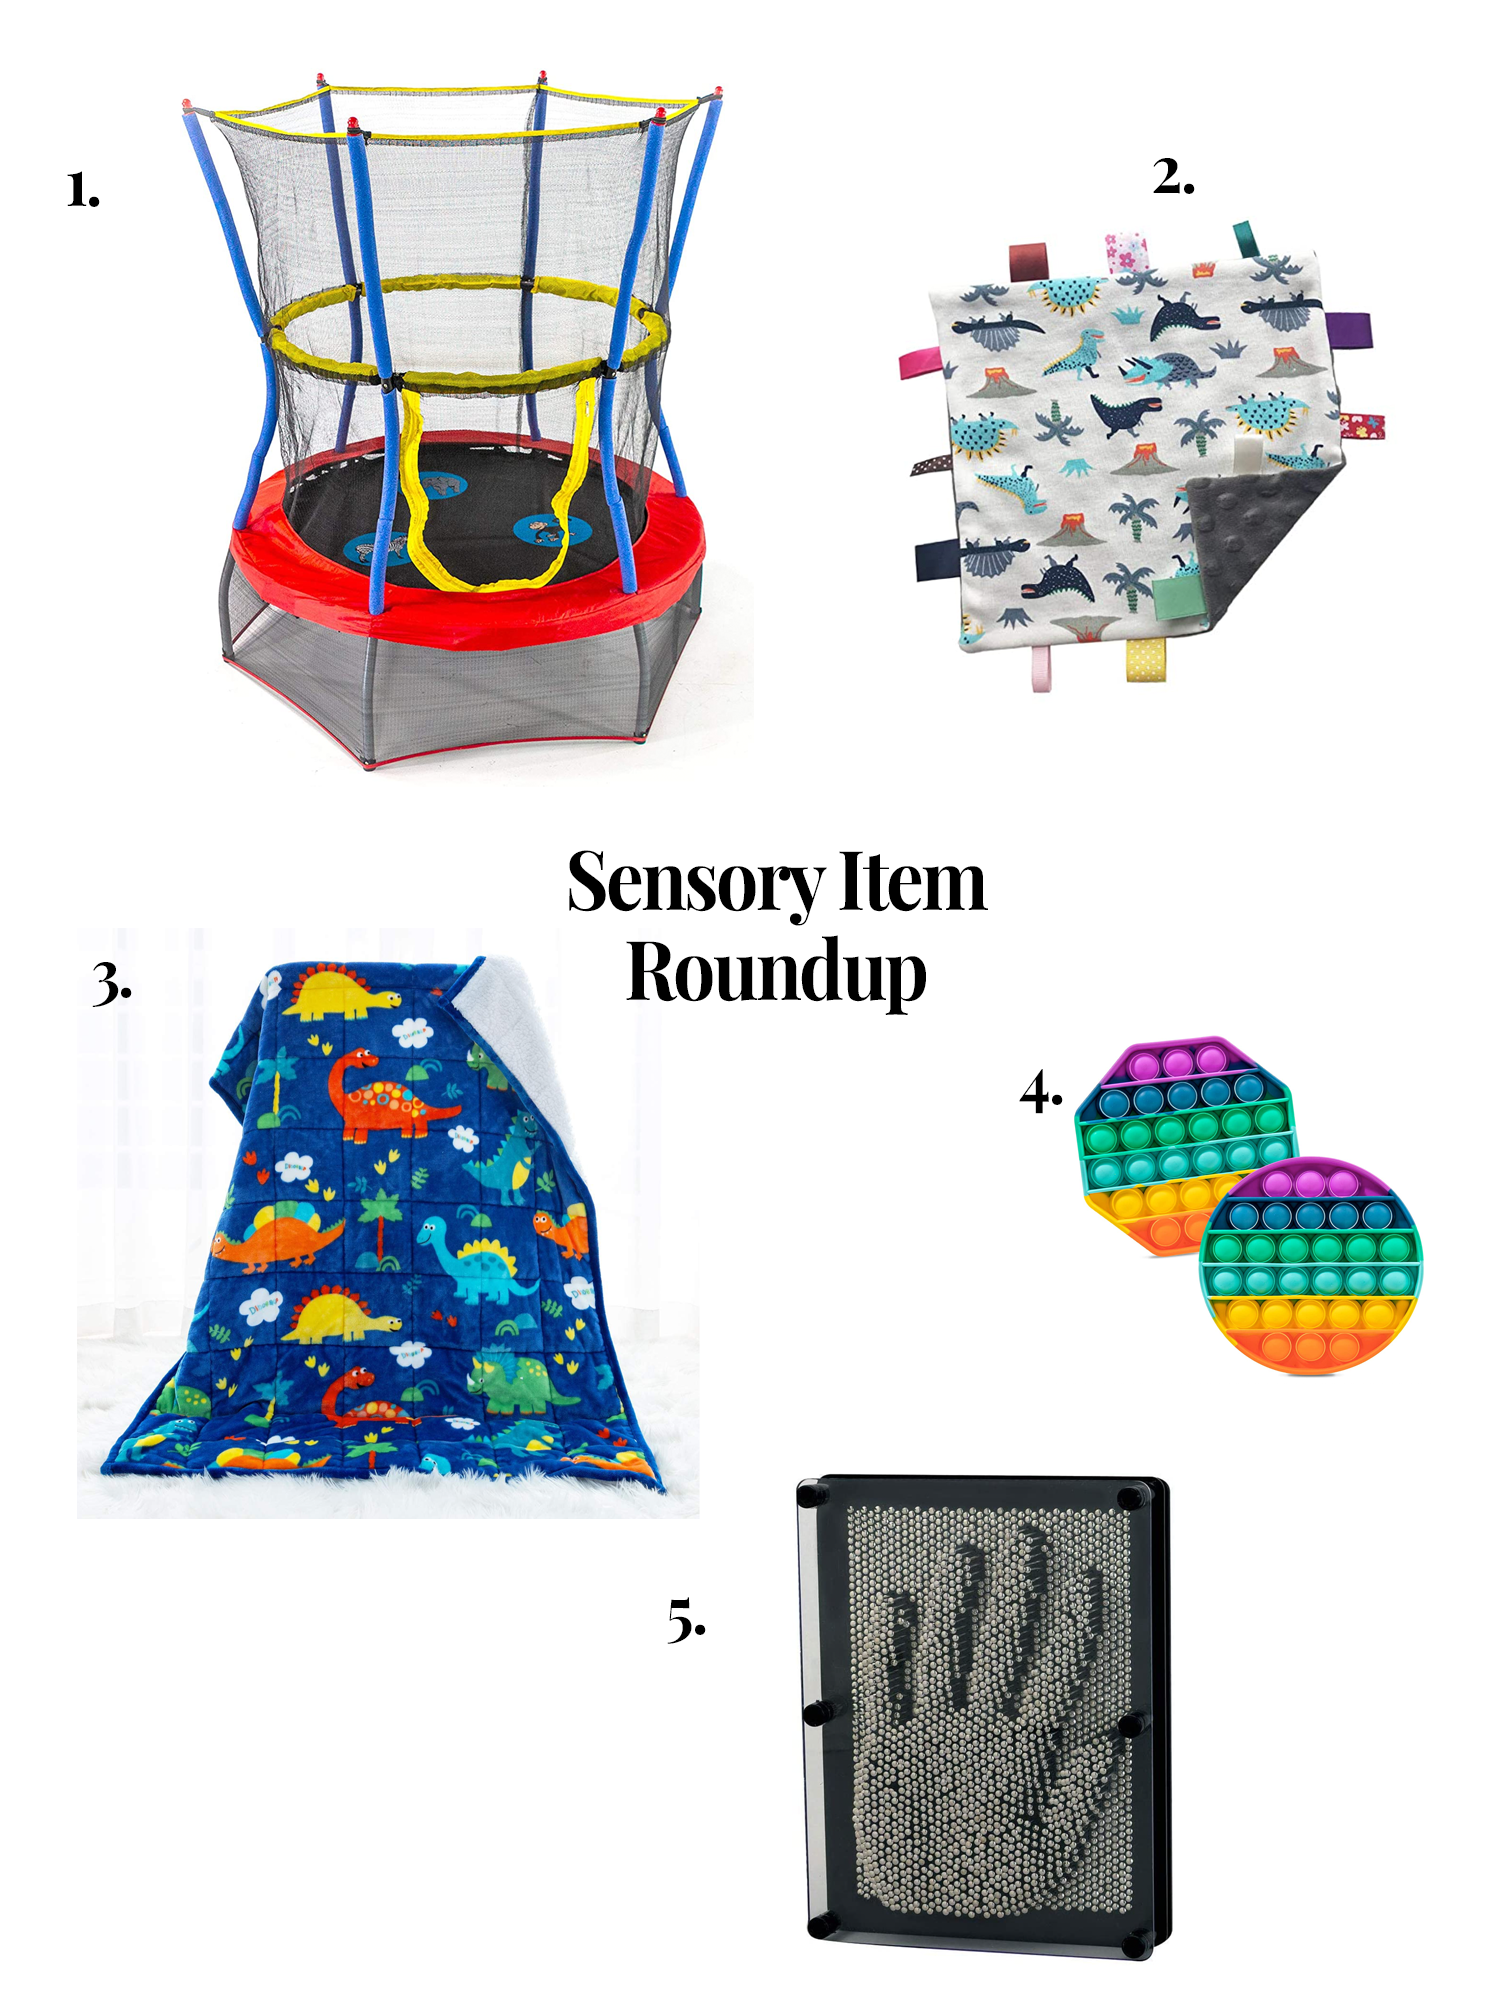 Listing of five sensory items for autism